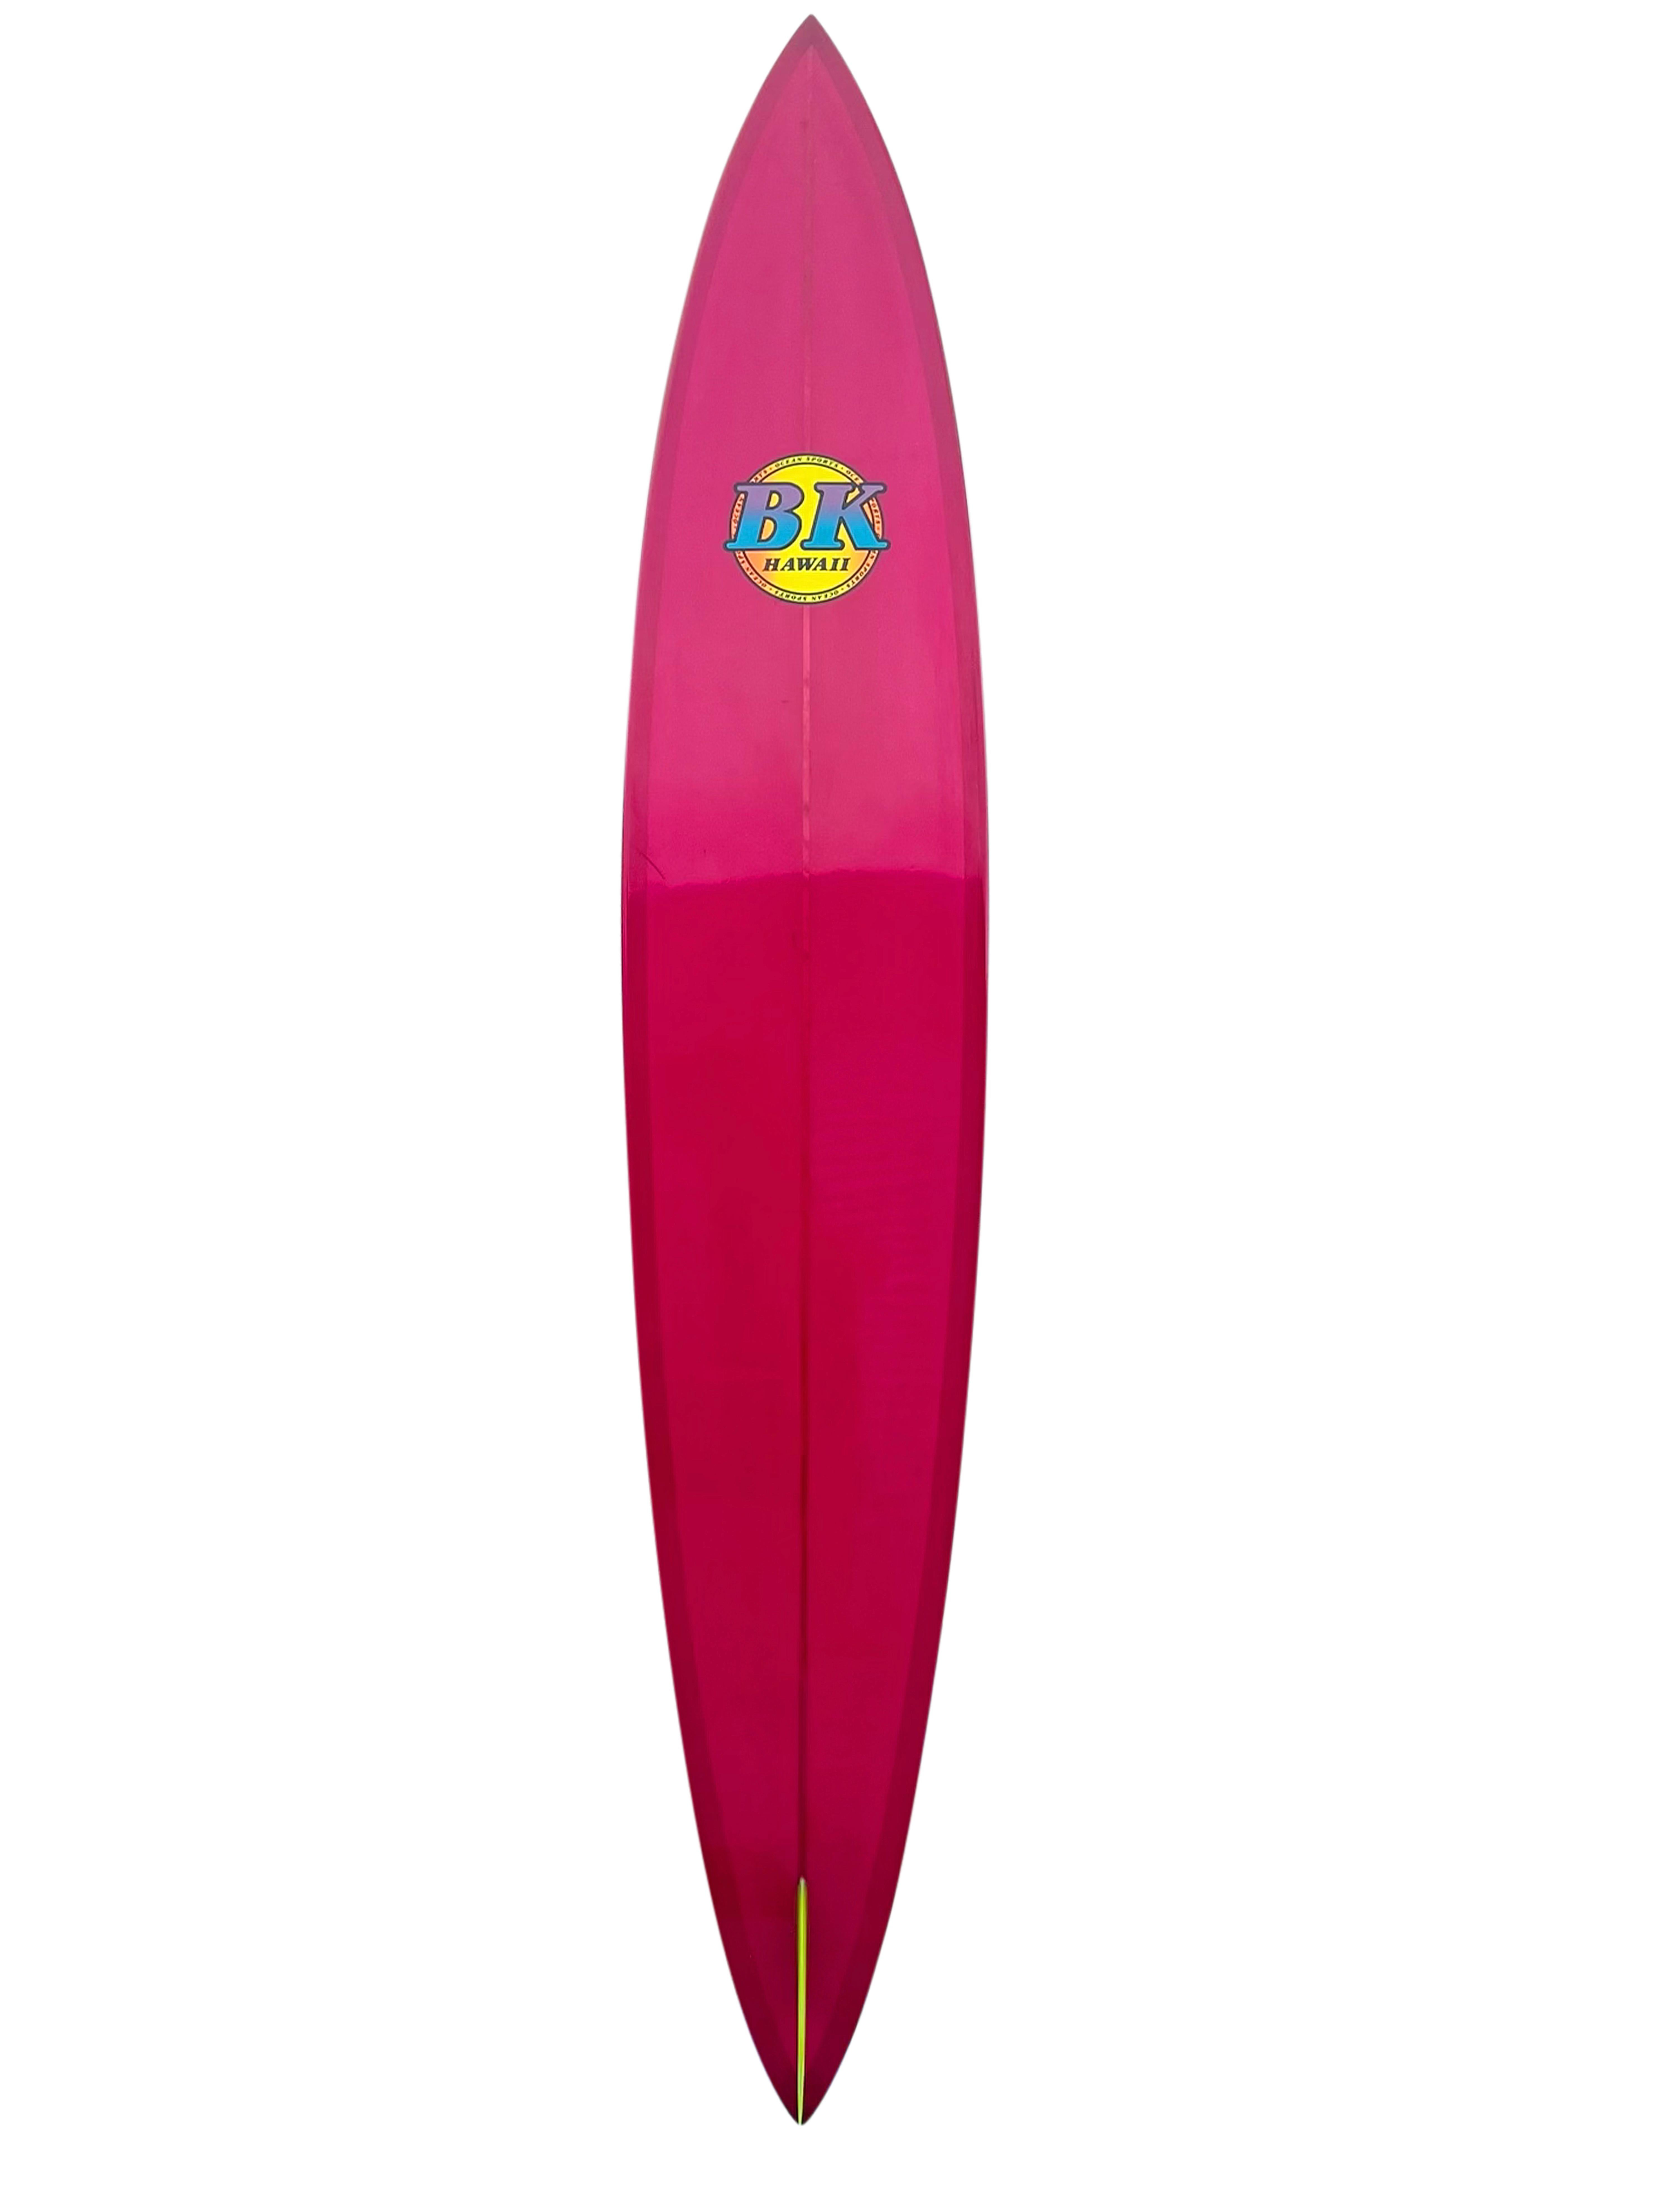 1991 vintage BK Hawaii big wave surfboard made by Barry Kanaiaupuni. Features pintail shape with striking magenta color tint and neon yellow fin. A superb example of a vintage big wave surfboard made to ride giant waves at Waimea Bay in Hawaii.